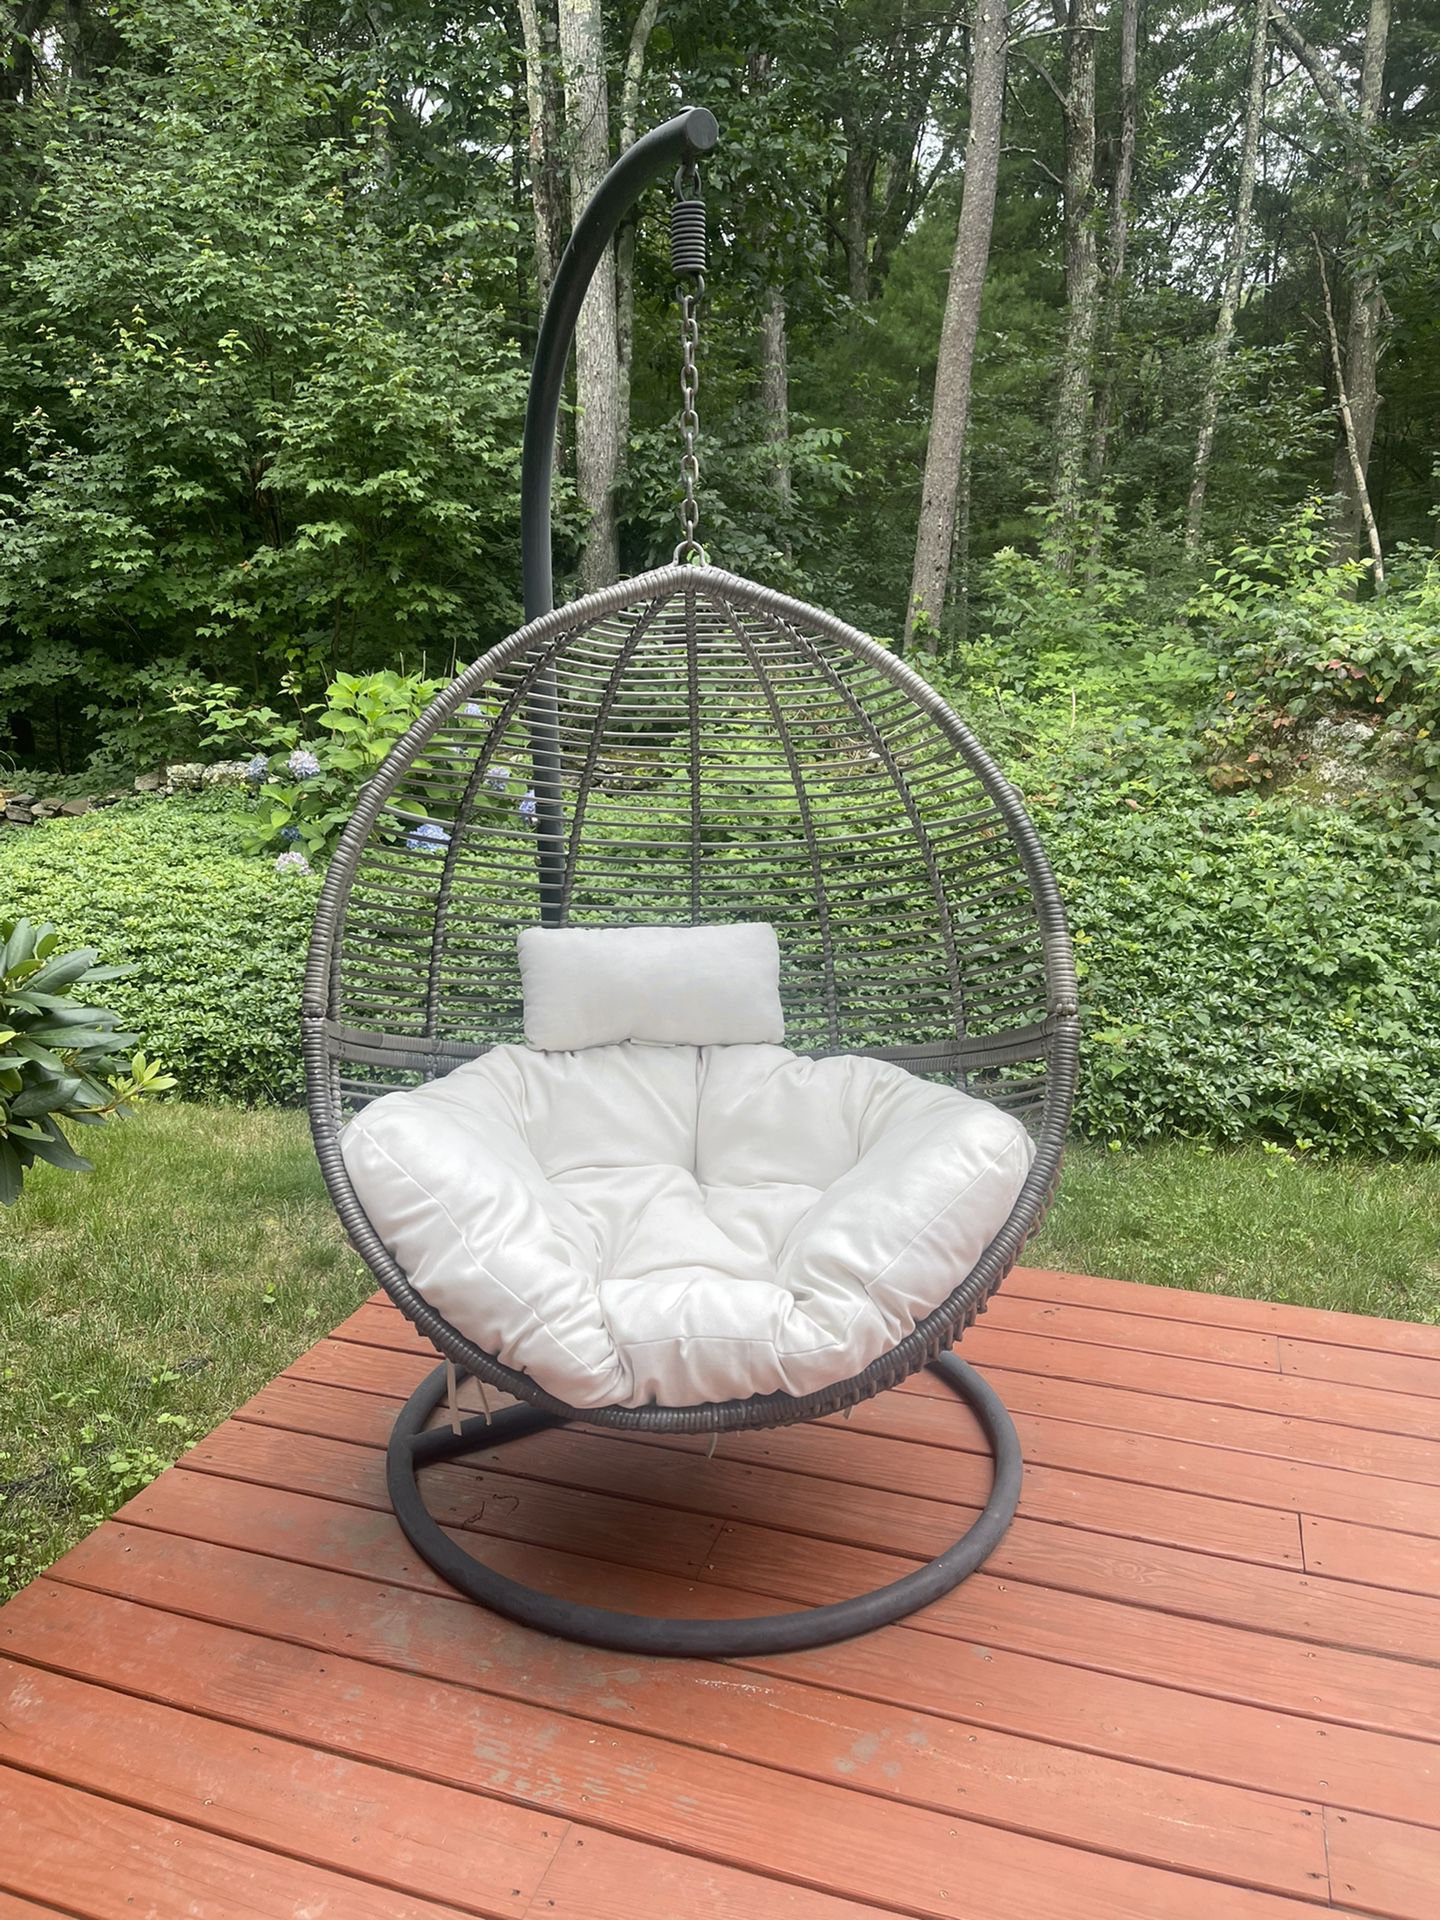 Gray Wicker Round Outdoor Patio Egg Lounge Chair Swing With Biscuit Colored Cushions